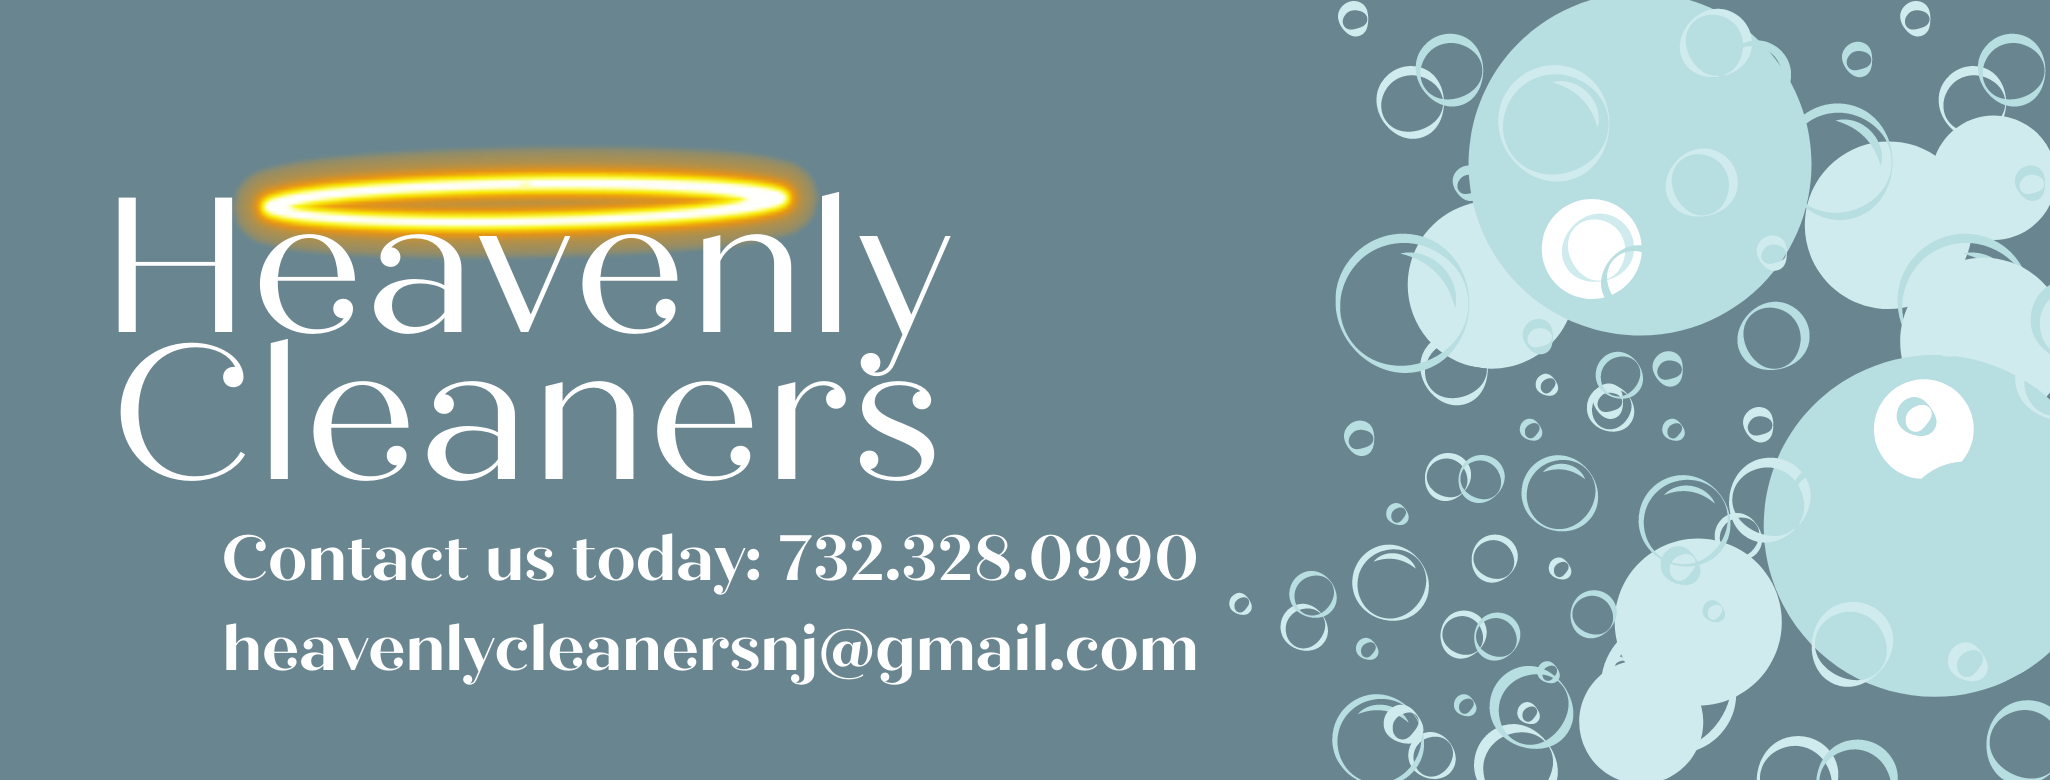 Heavenly cleaners